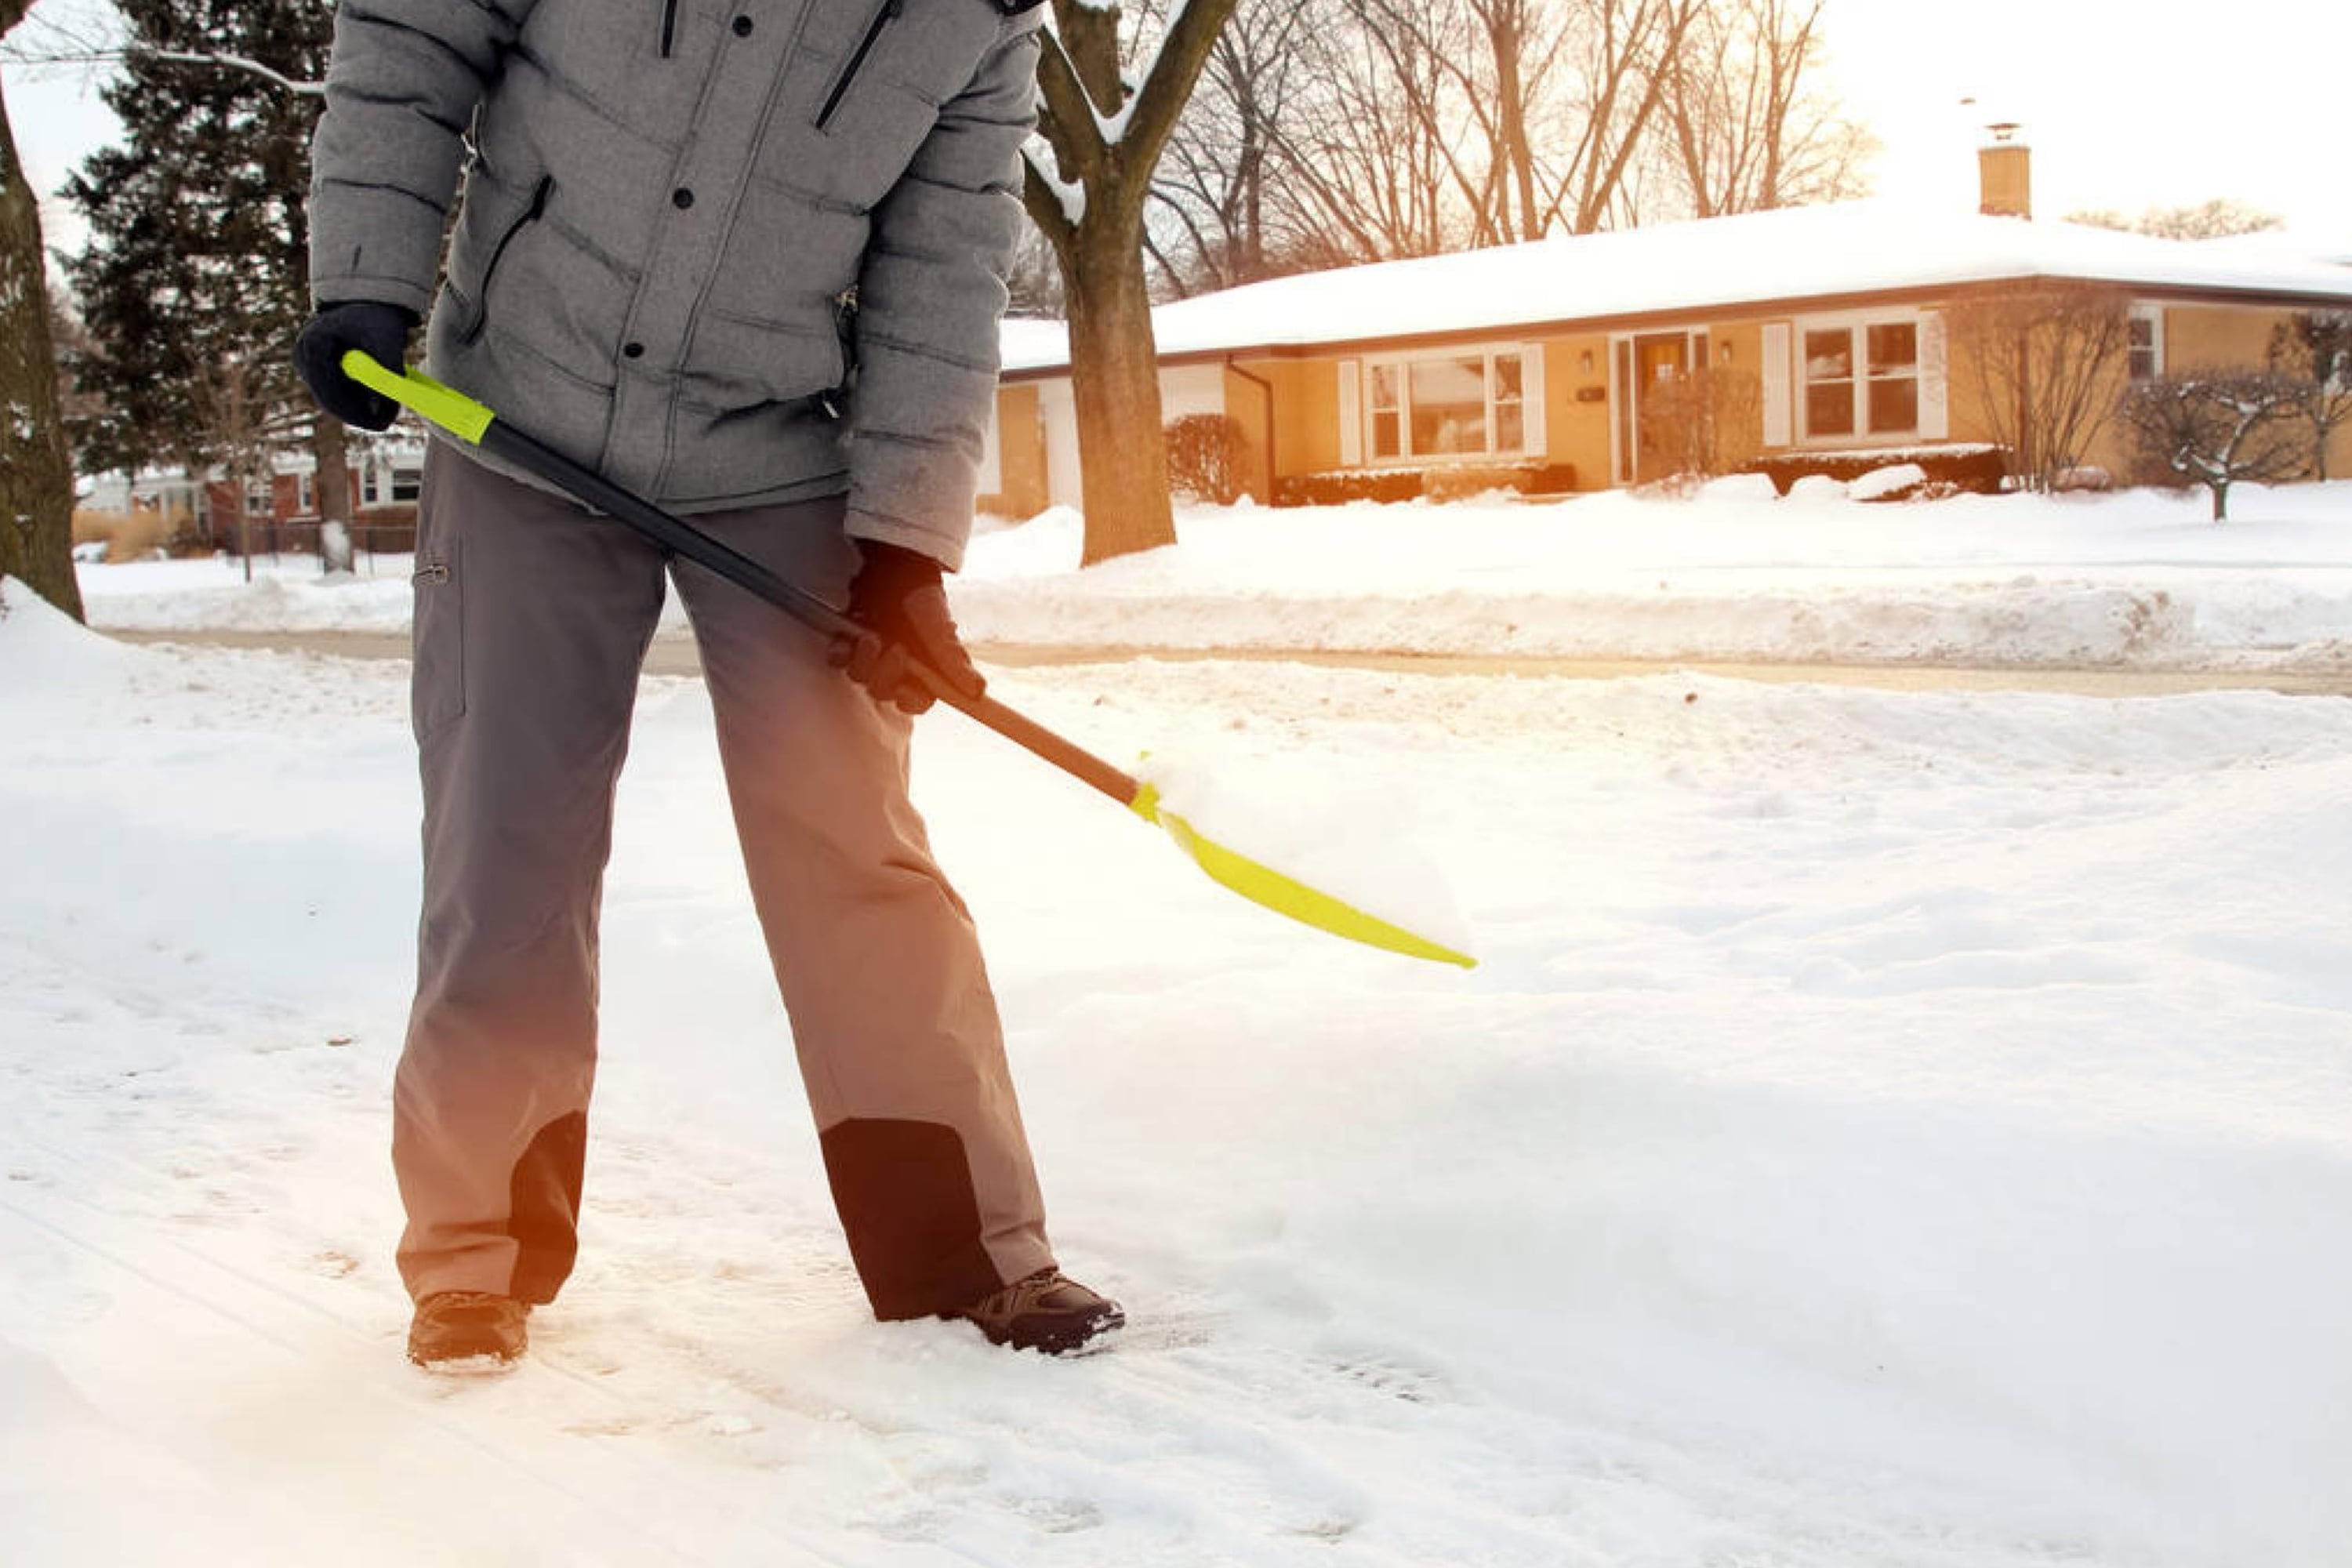 How to Stay Safe While Shoveling Snow